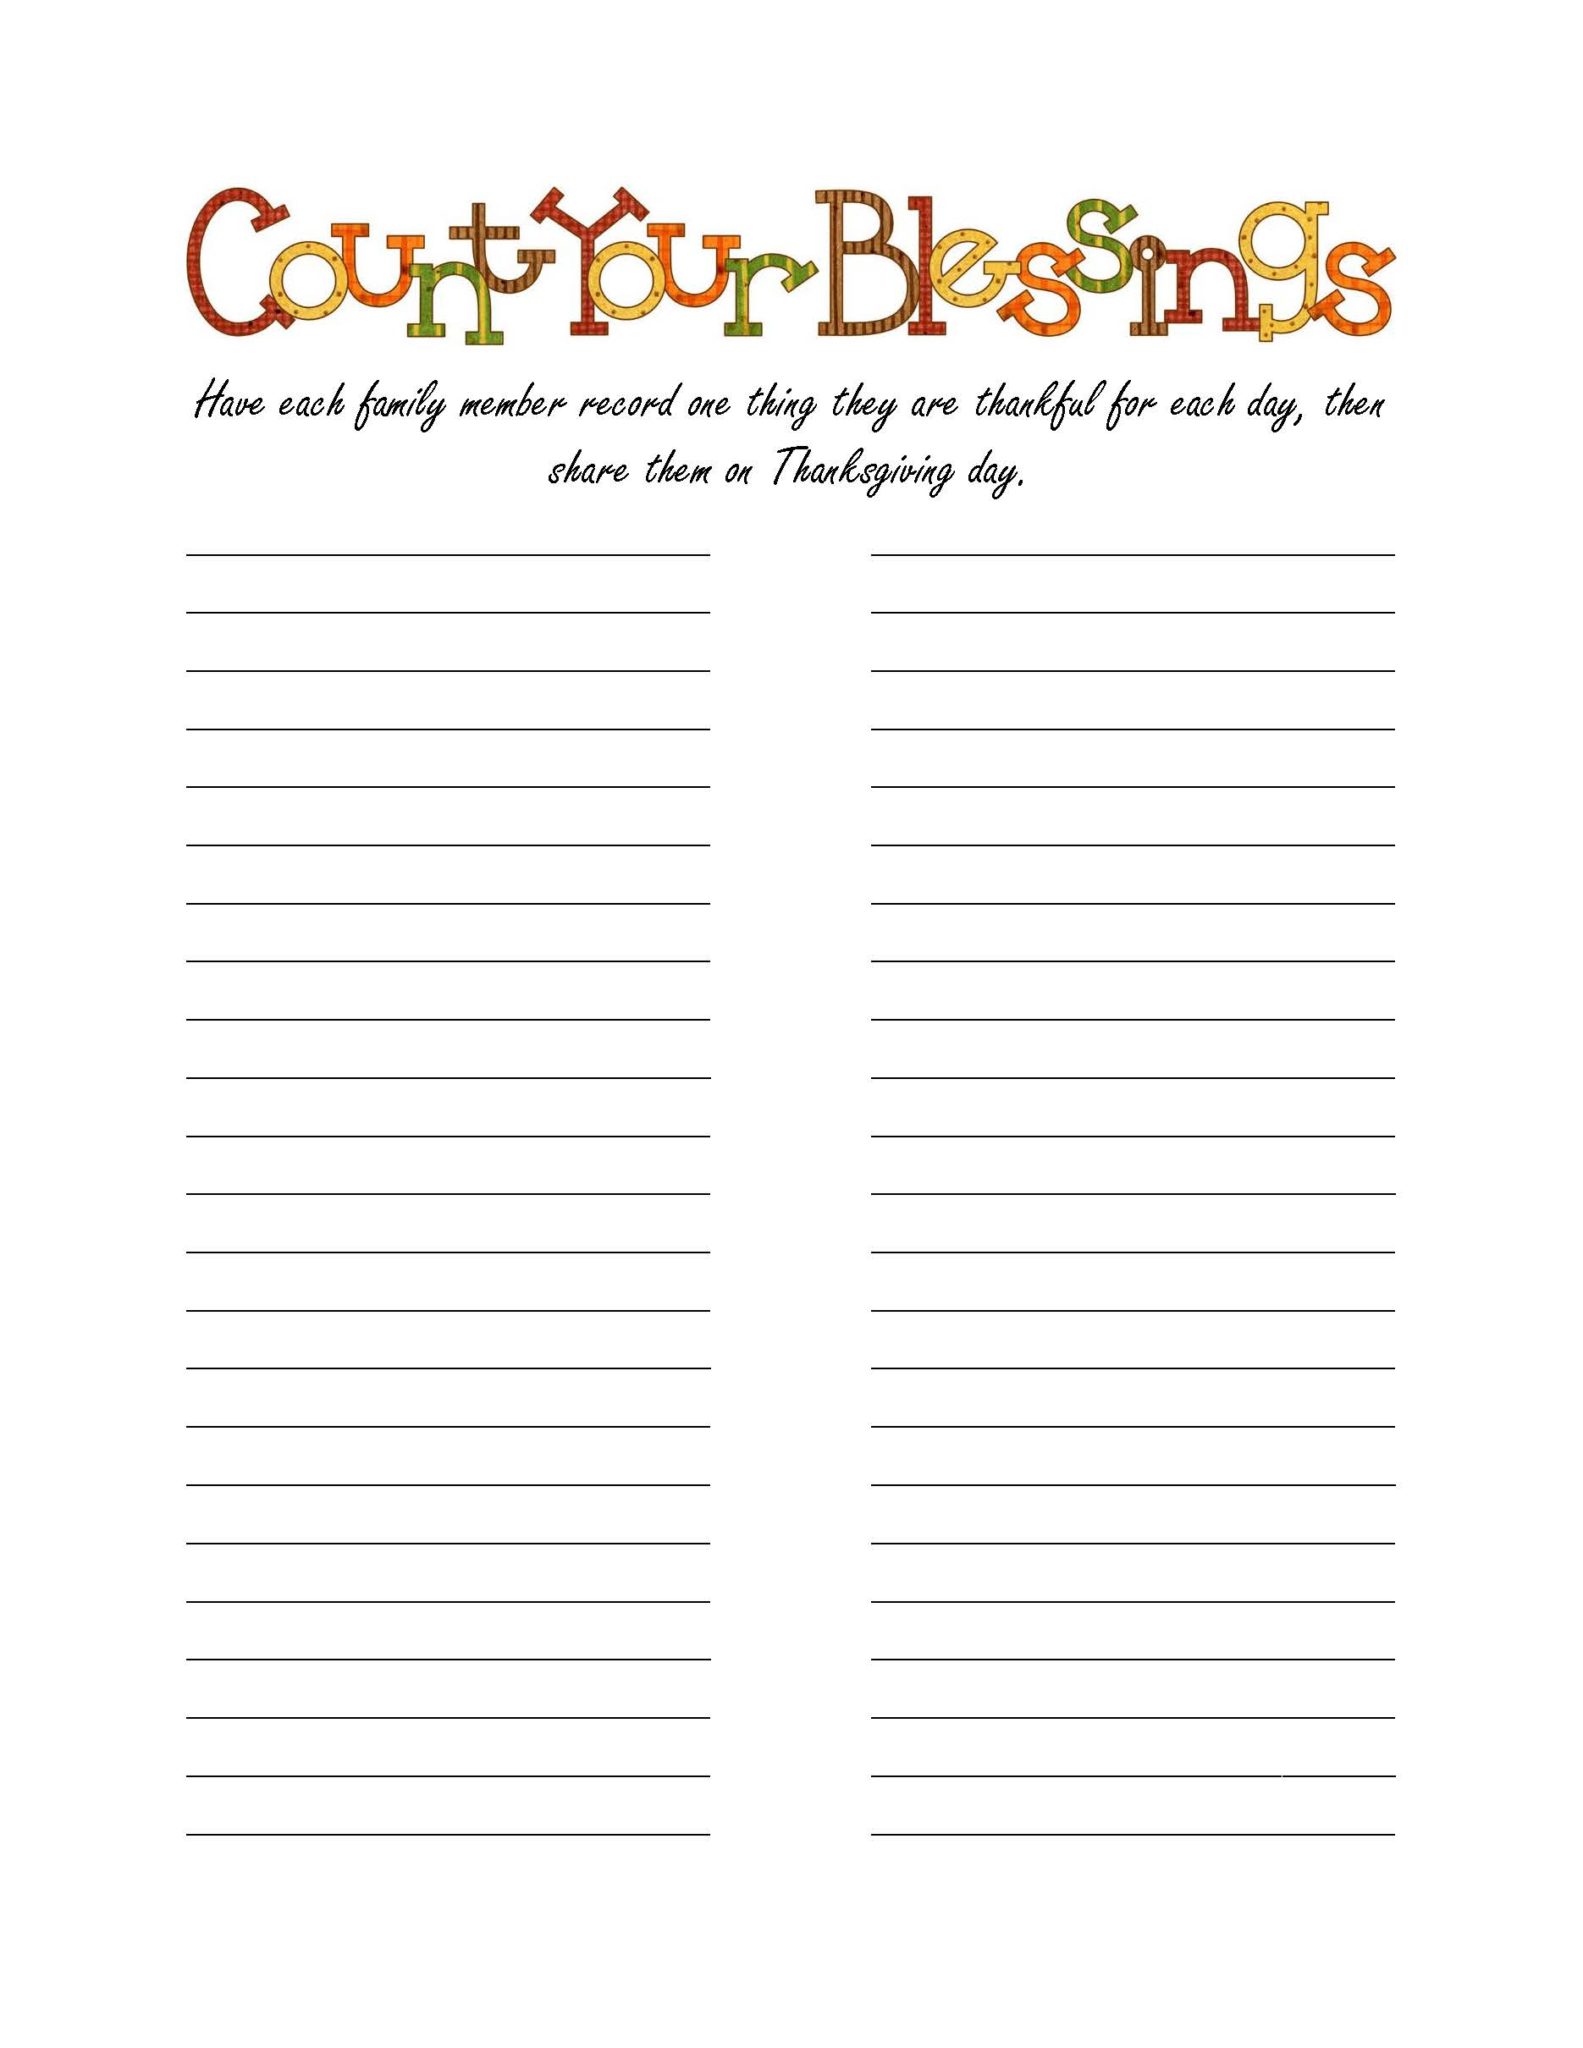 count-your-blessings-free-printable-california-unpublished